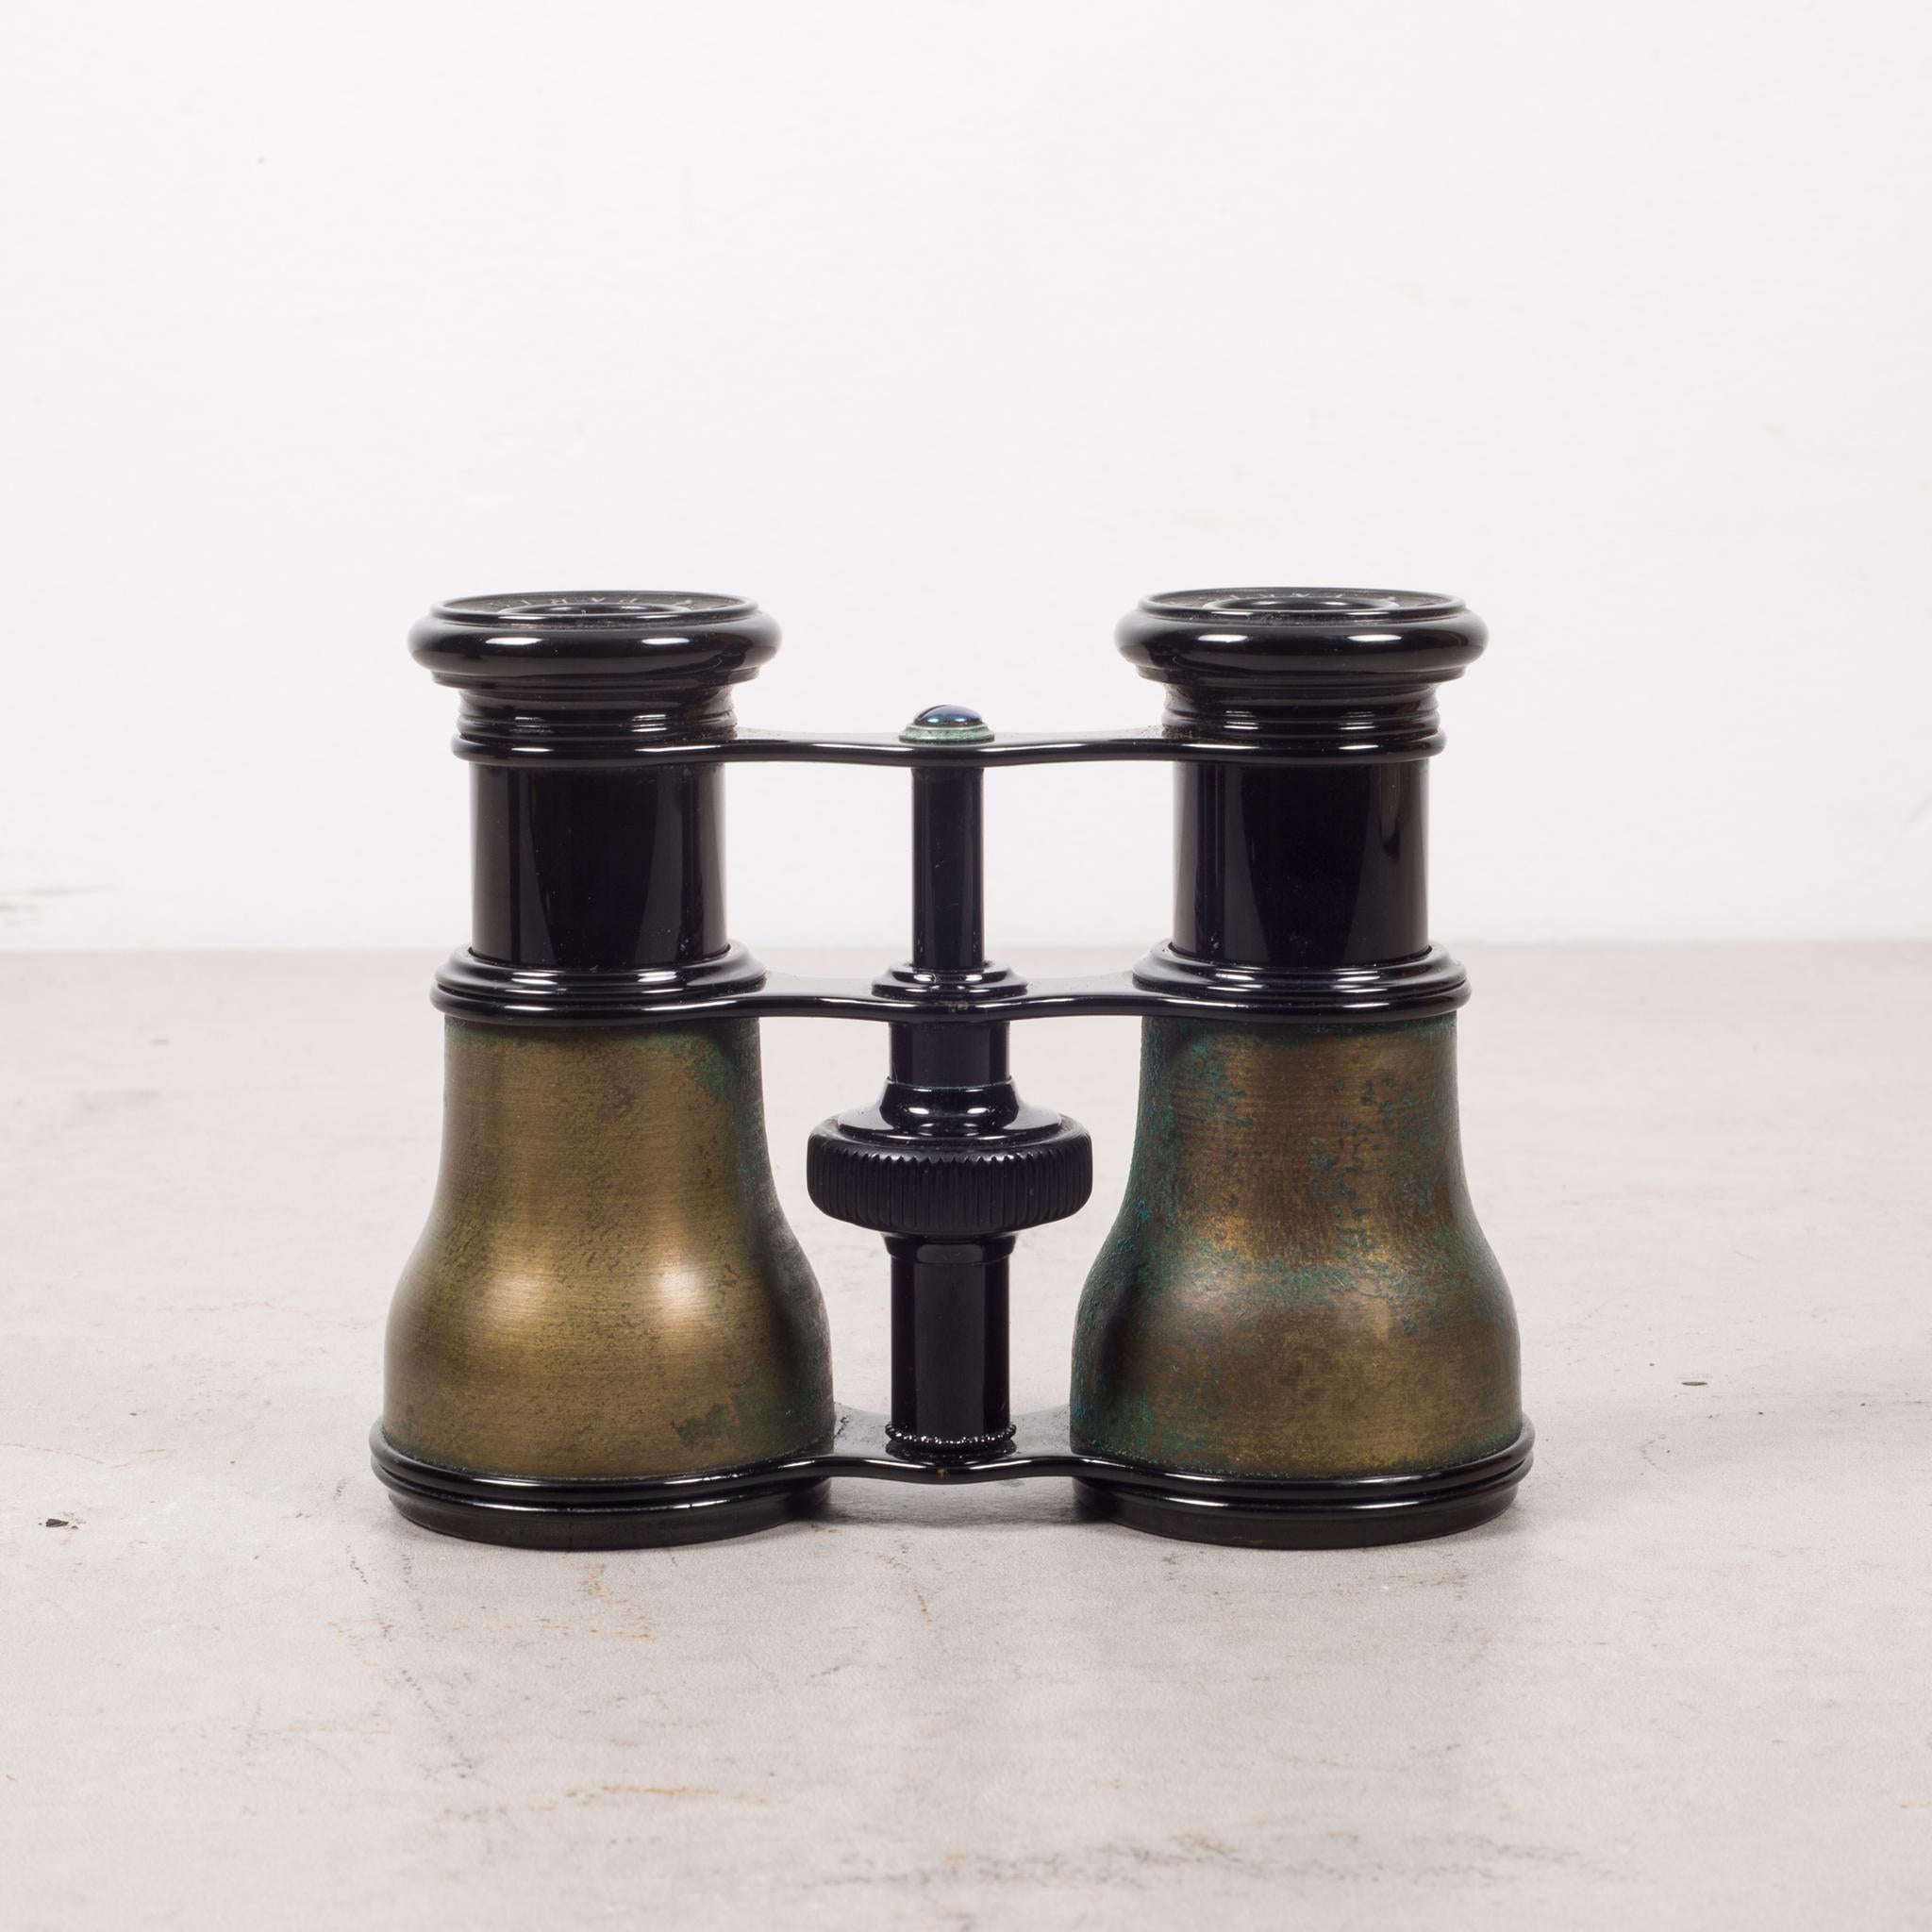 About:

An antique pair of brass binoculars marked on the eyepiece with 